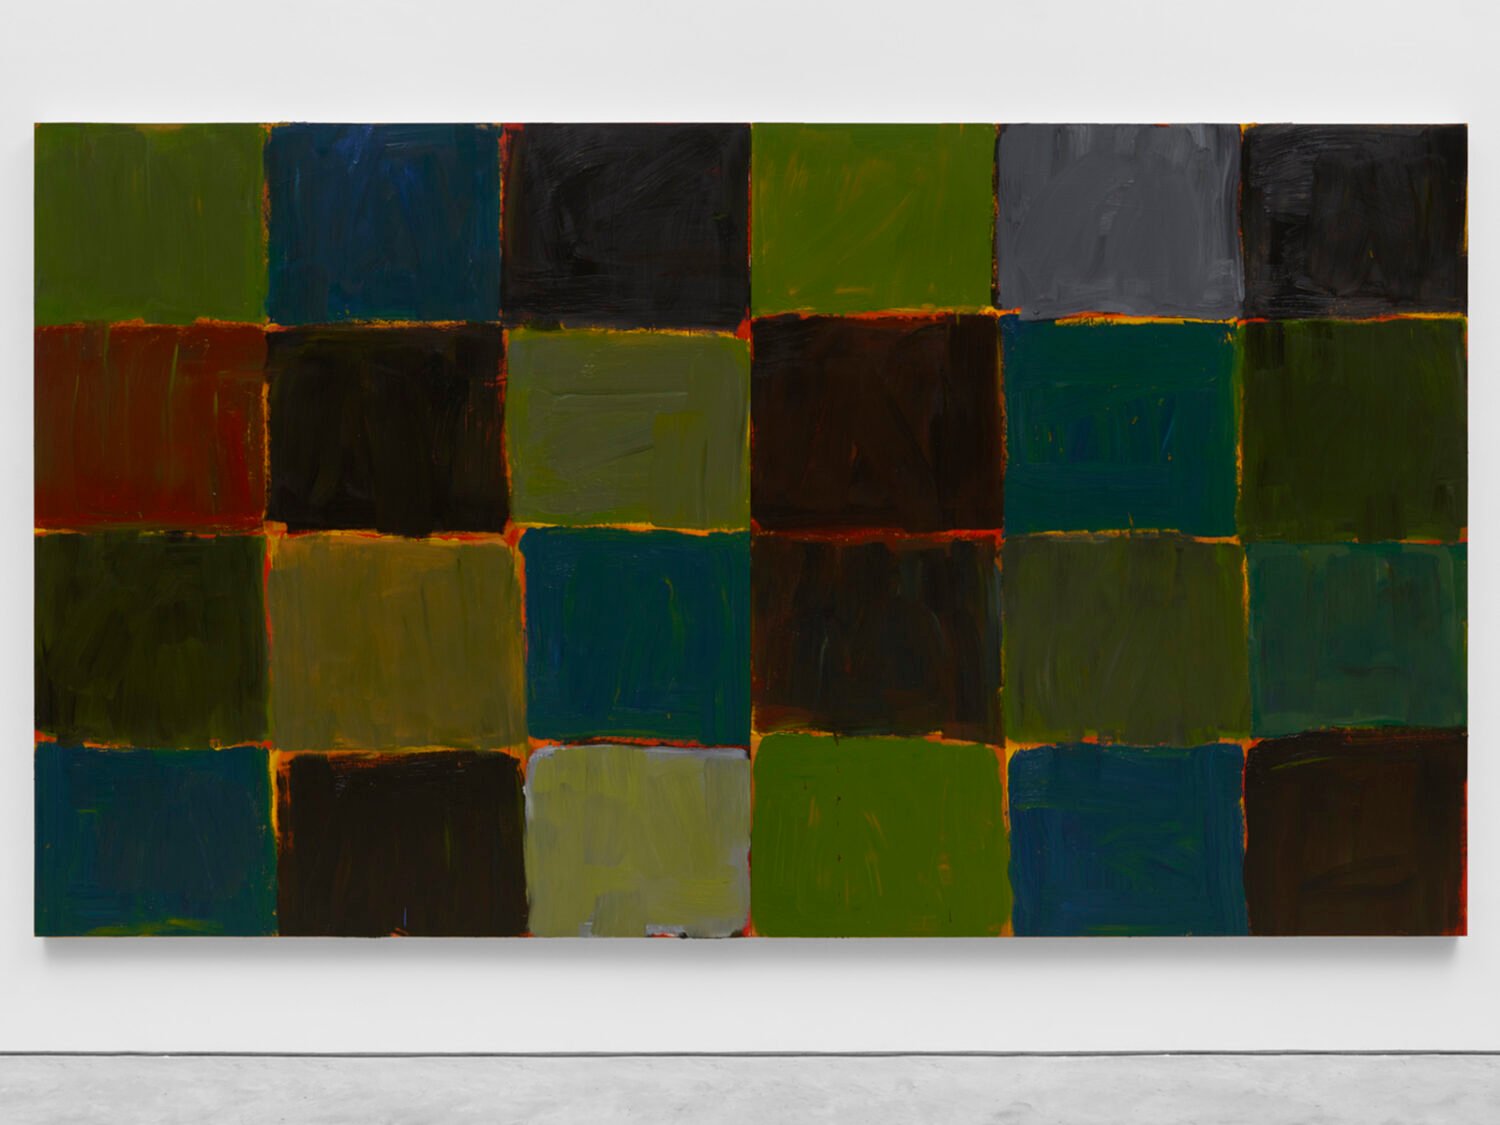 Sean Scully at Lisson